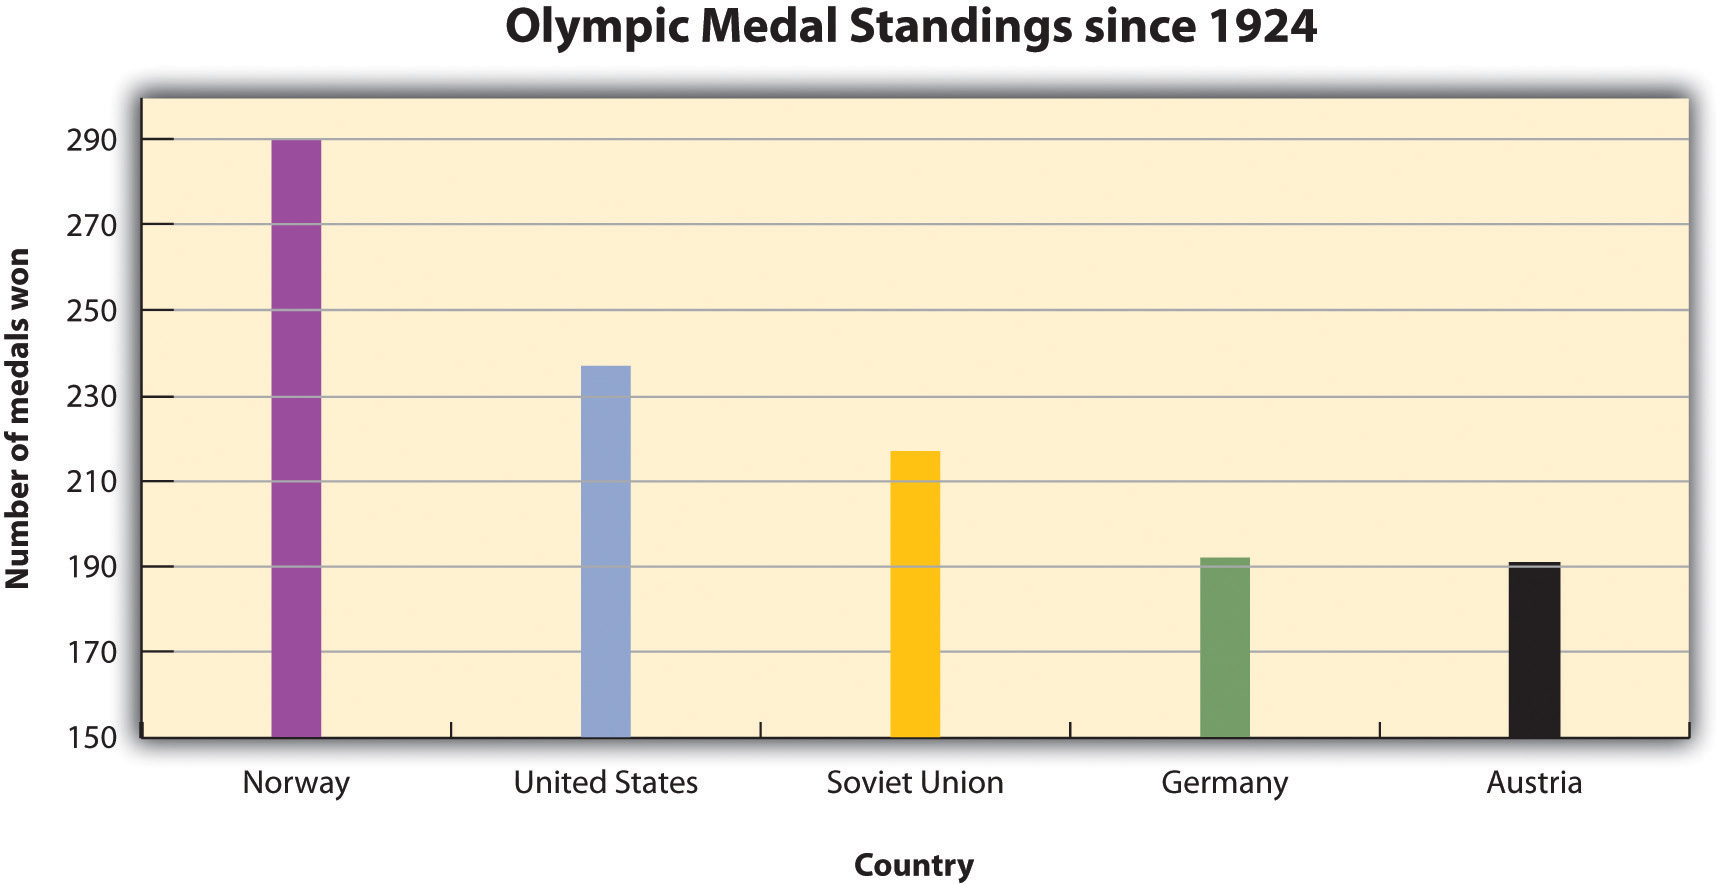 Number of medals won since 1924. Norway has won the most, then the United States, Soviet Union, Germany, and Austria.